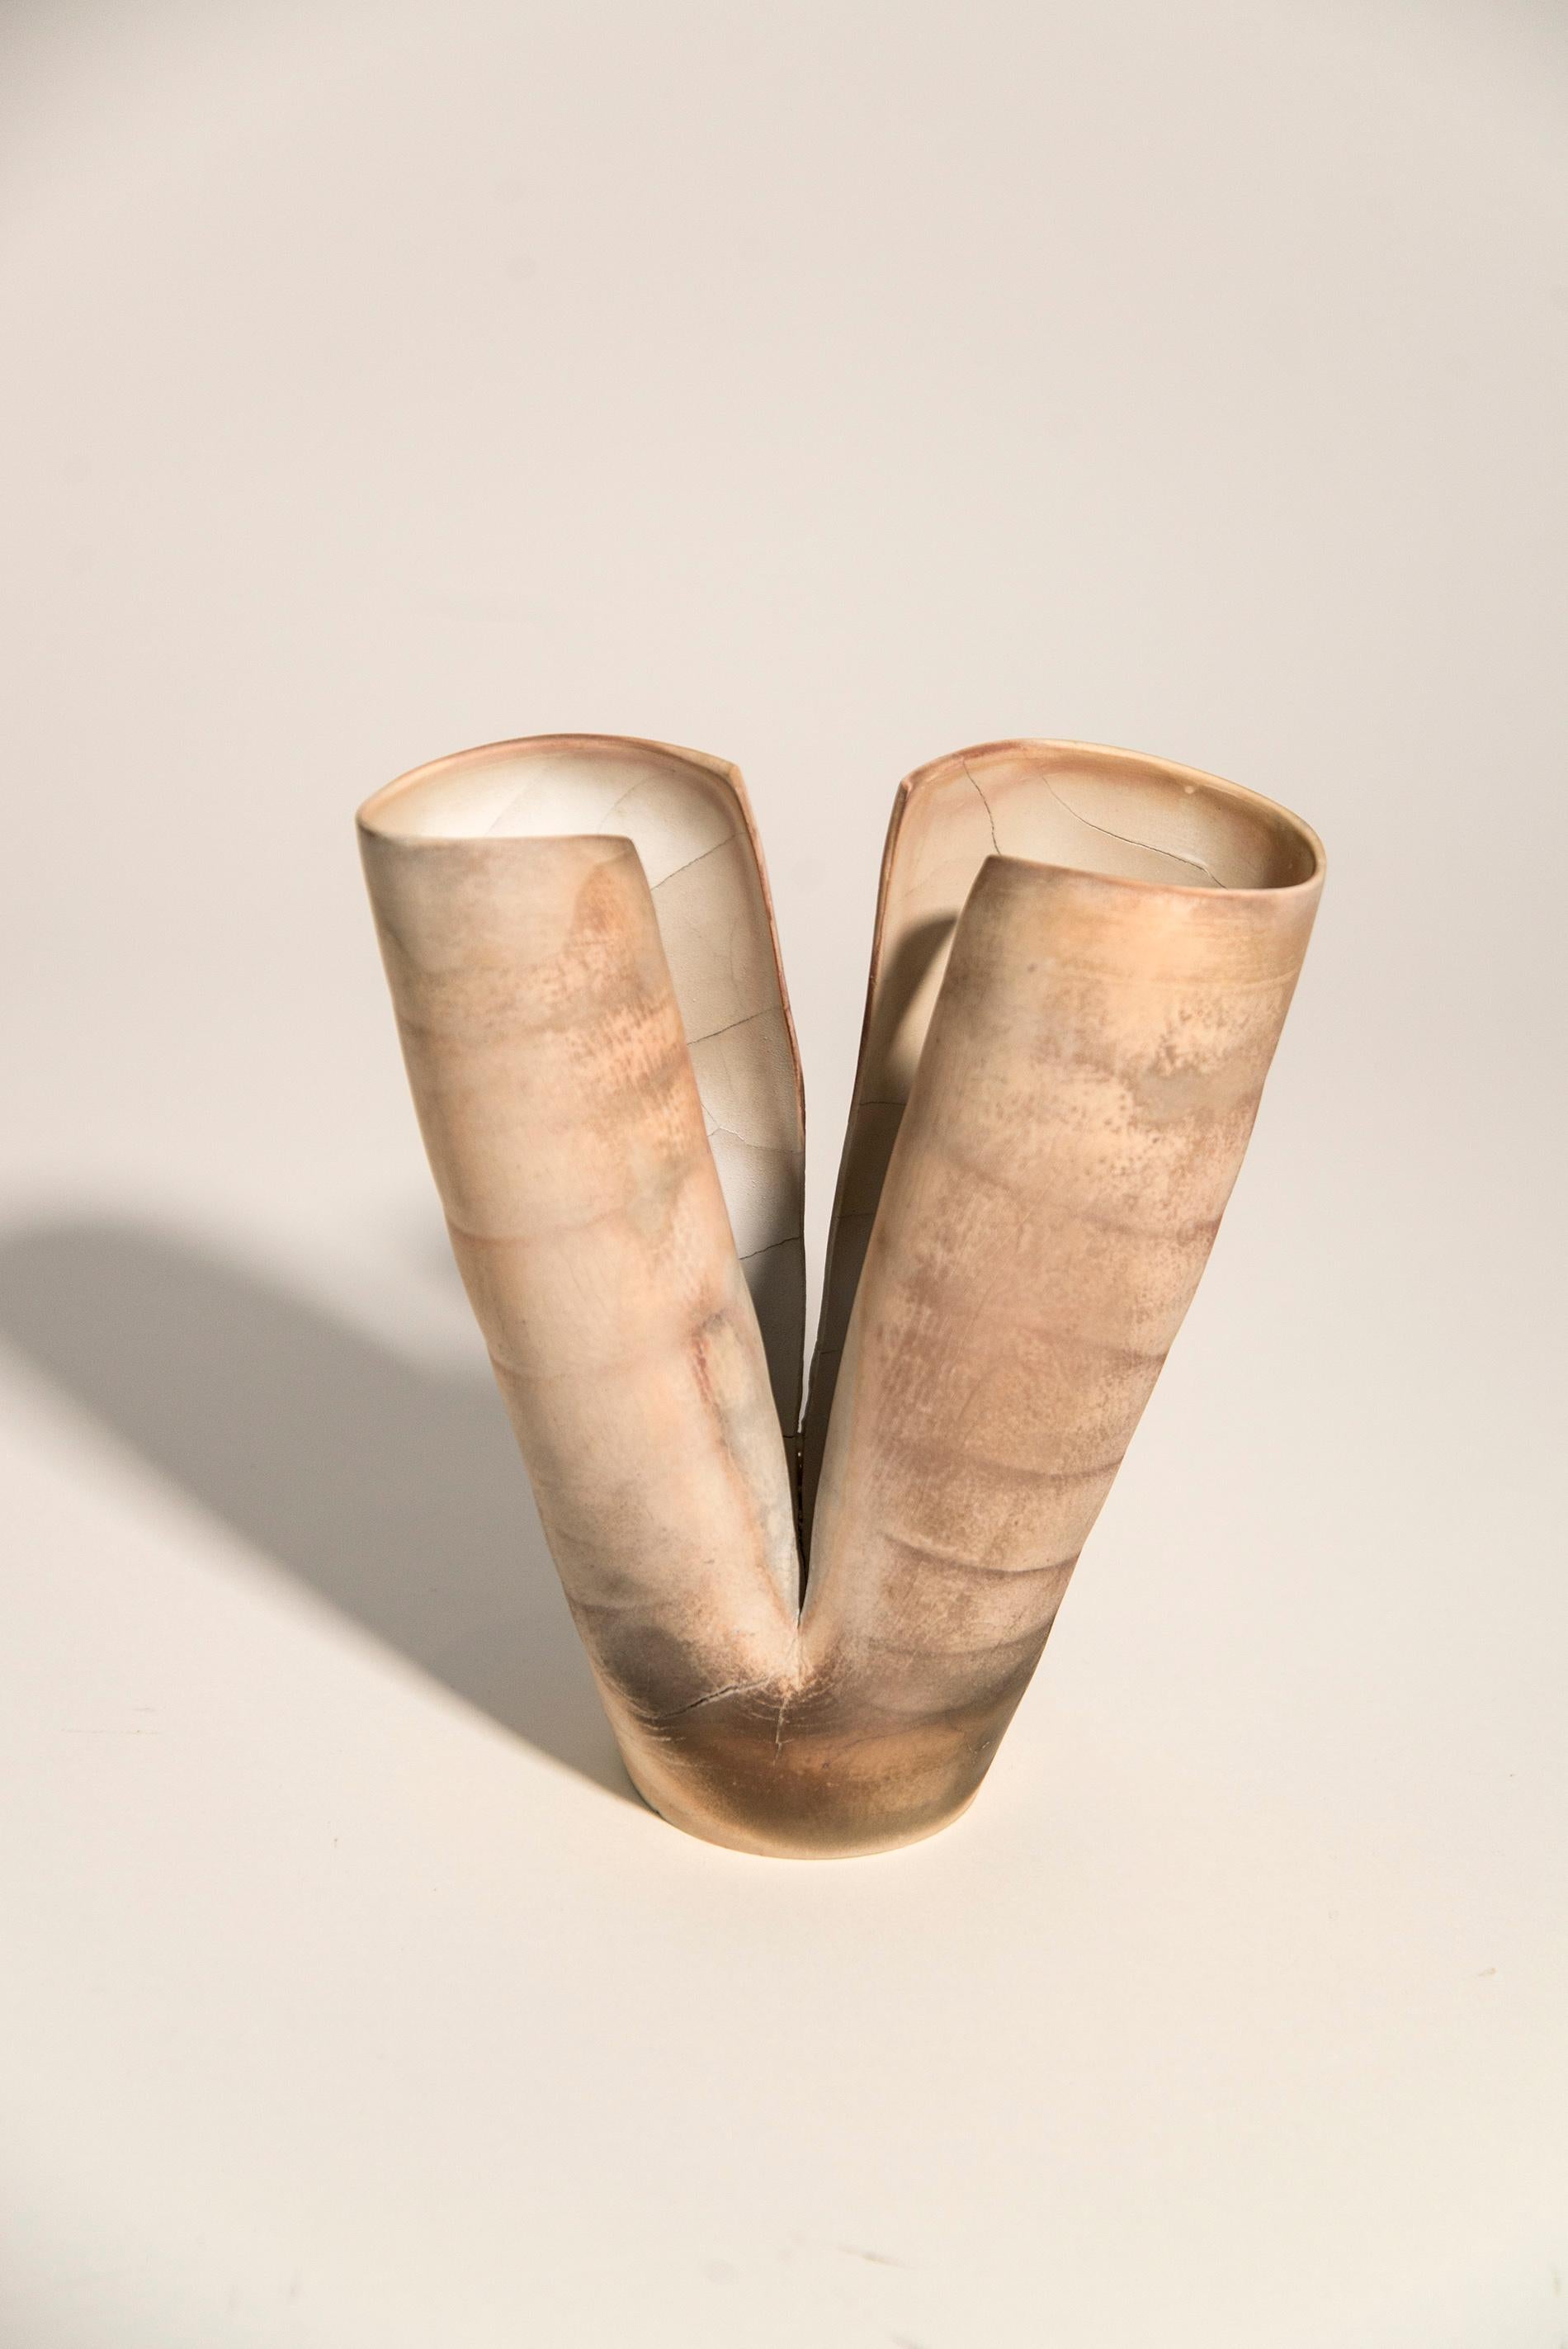 Joined at the Hip - intricate, nature-inspired, hand-shaped porcelain sculpture